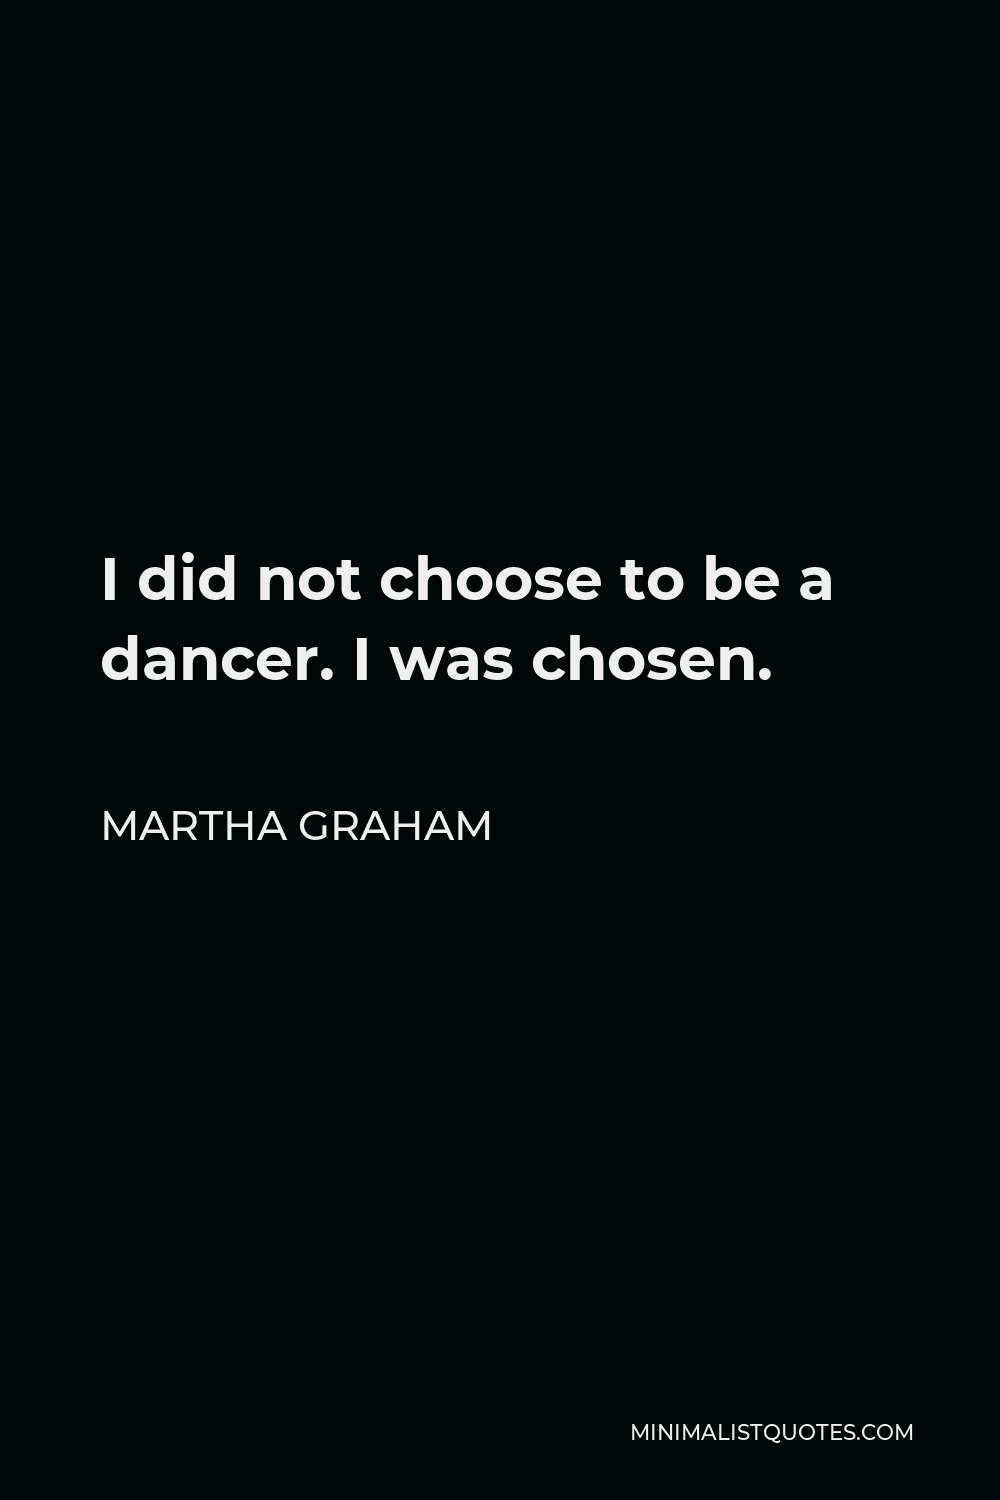 Martha Graham Quote - I did not choose to be a dancer. I was chosen.